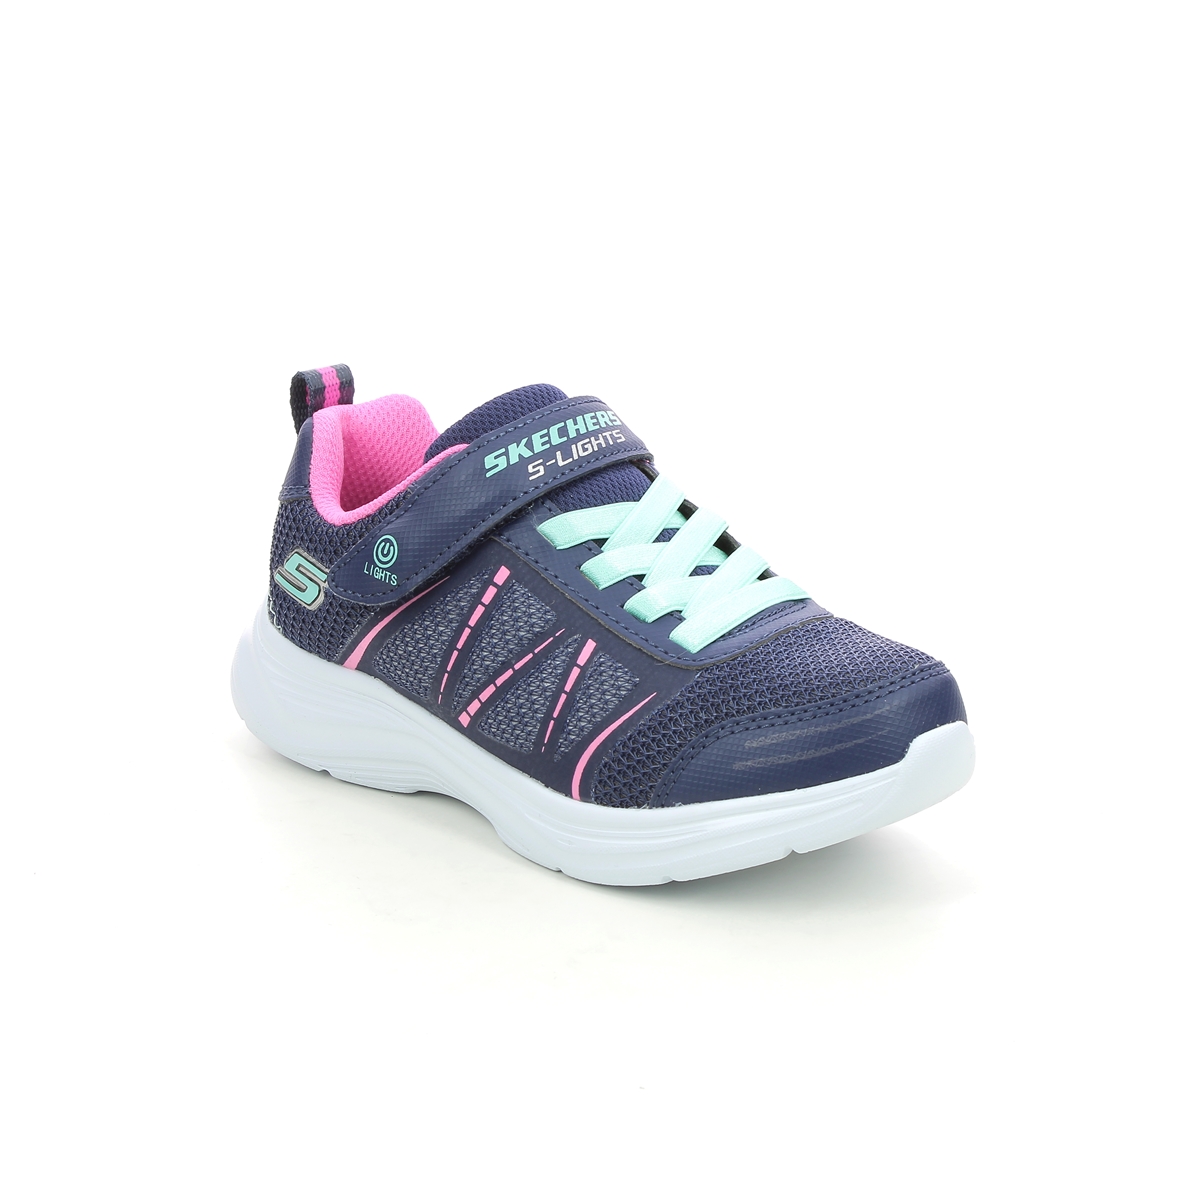 Skechers Glimmer Kicks NVY Navy Kids girls trainers 302302L in a Plain Textile in Size 35